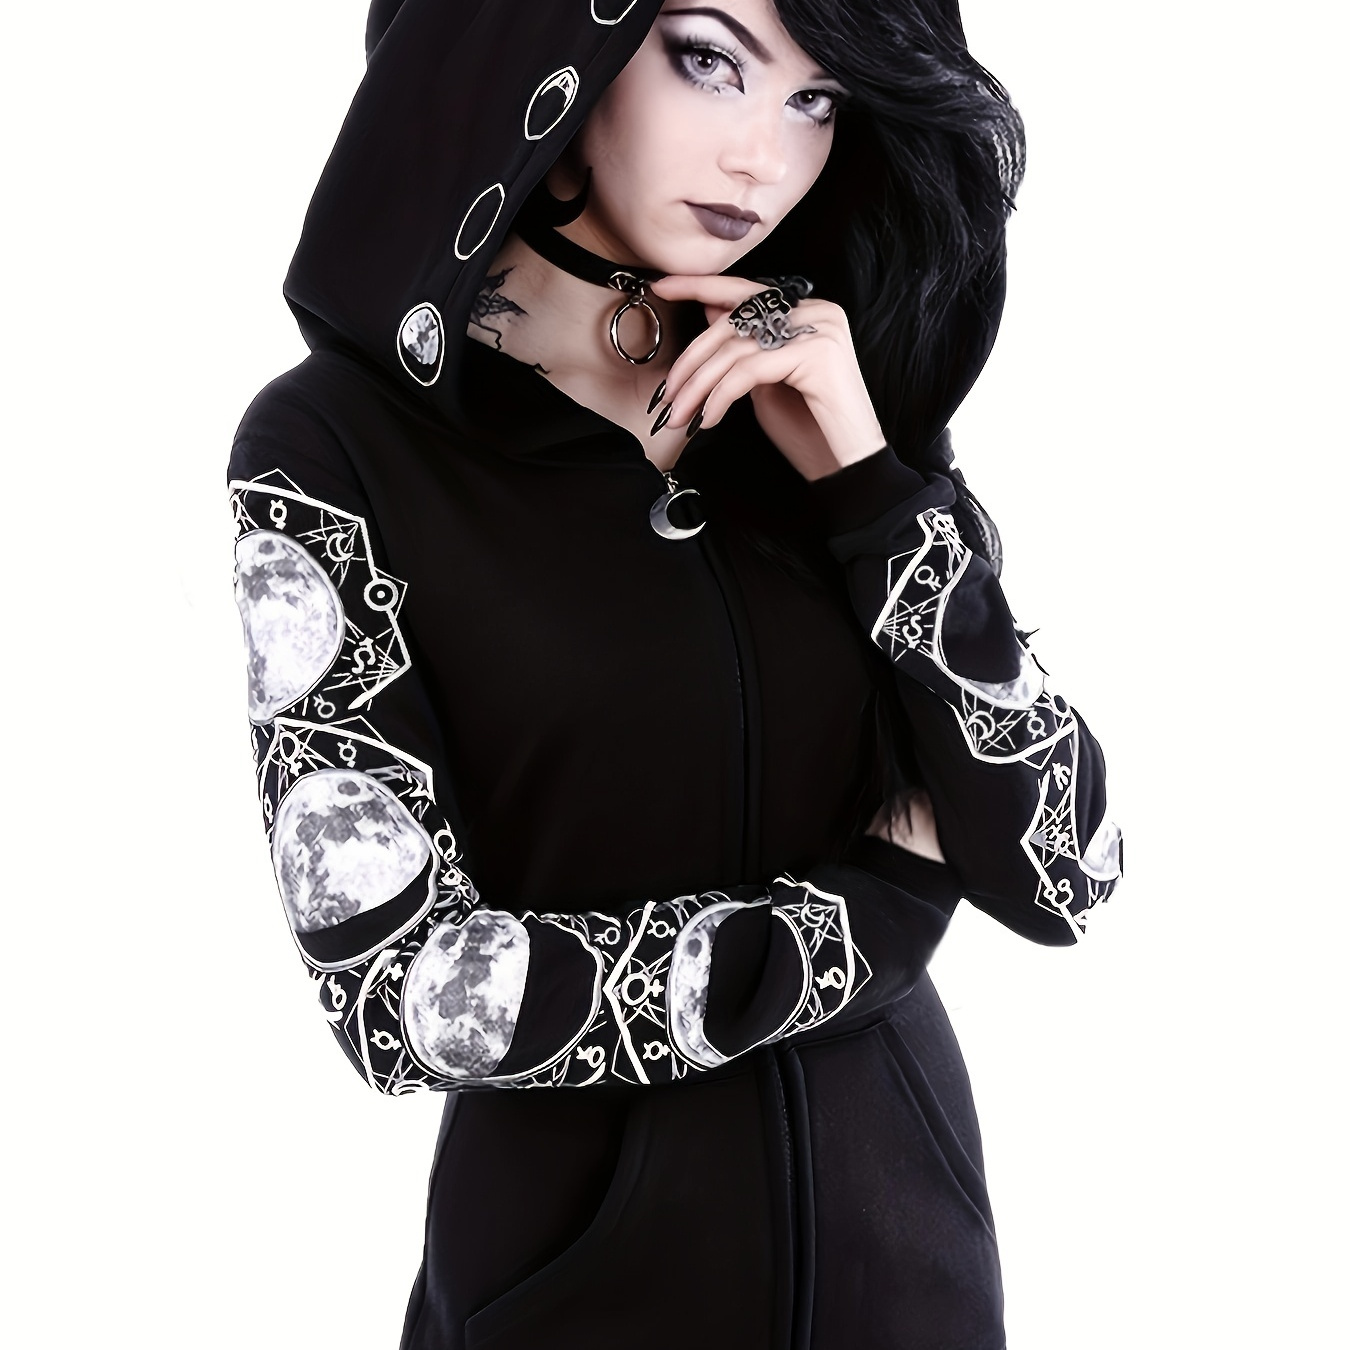 

Black & White Moon Hoodie, Large Hooded Zip Up Front Pocket Sweater, Gothic Casual Tops, Women's Clothing